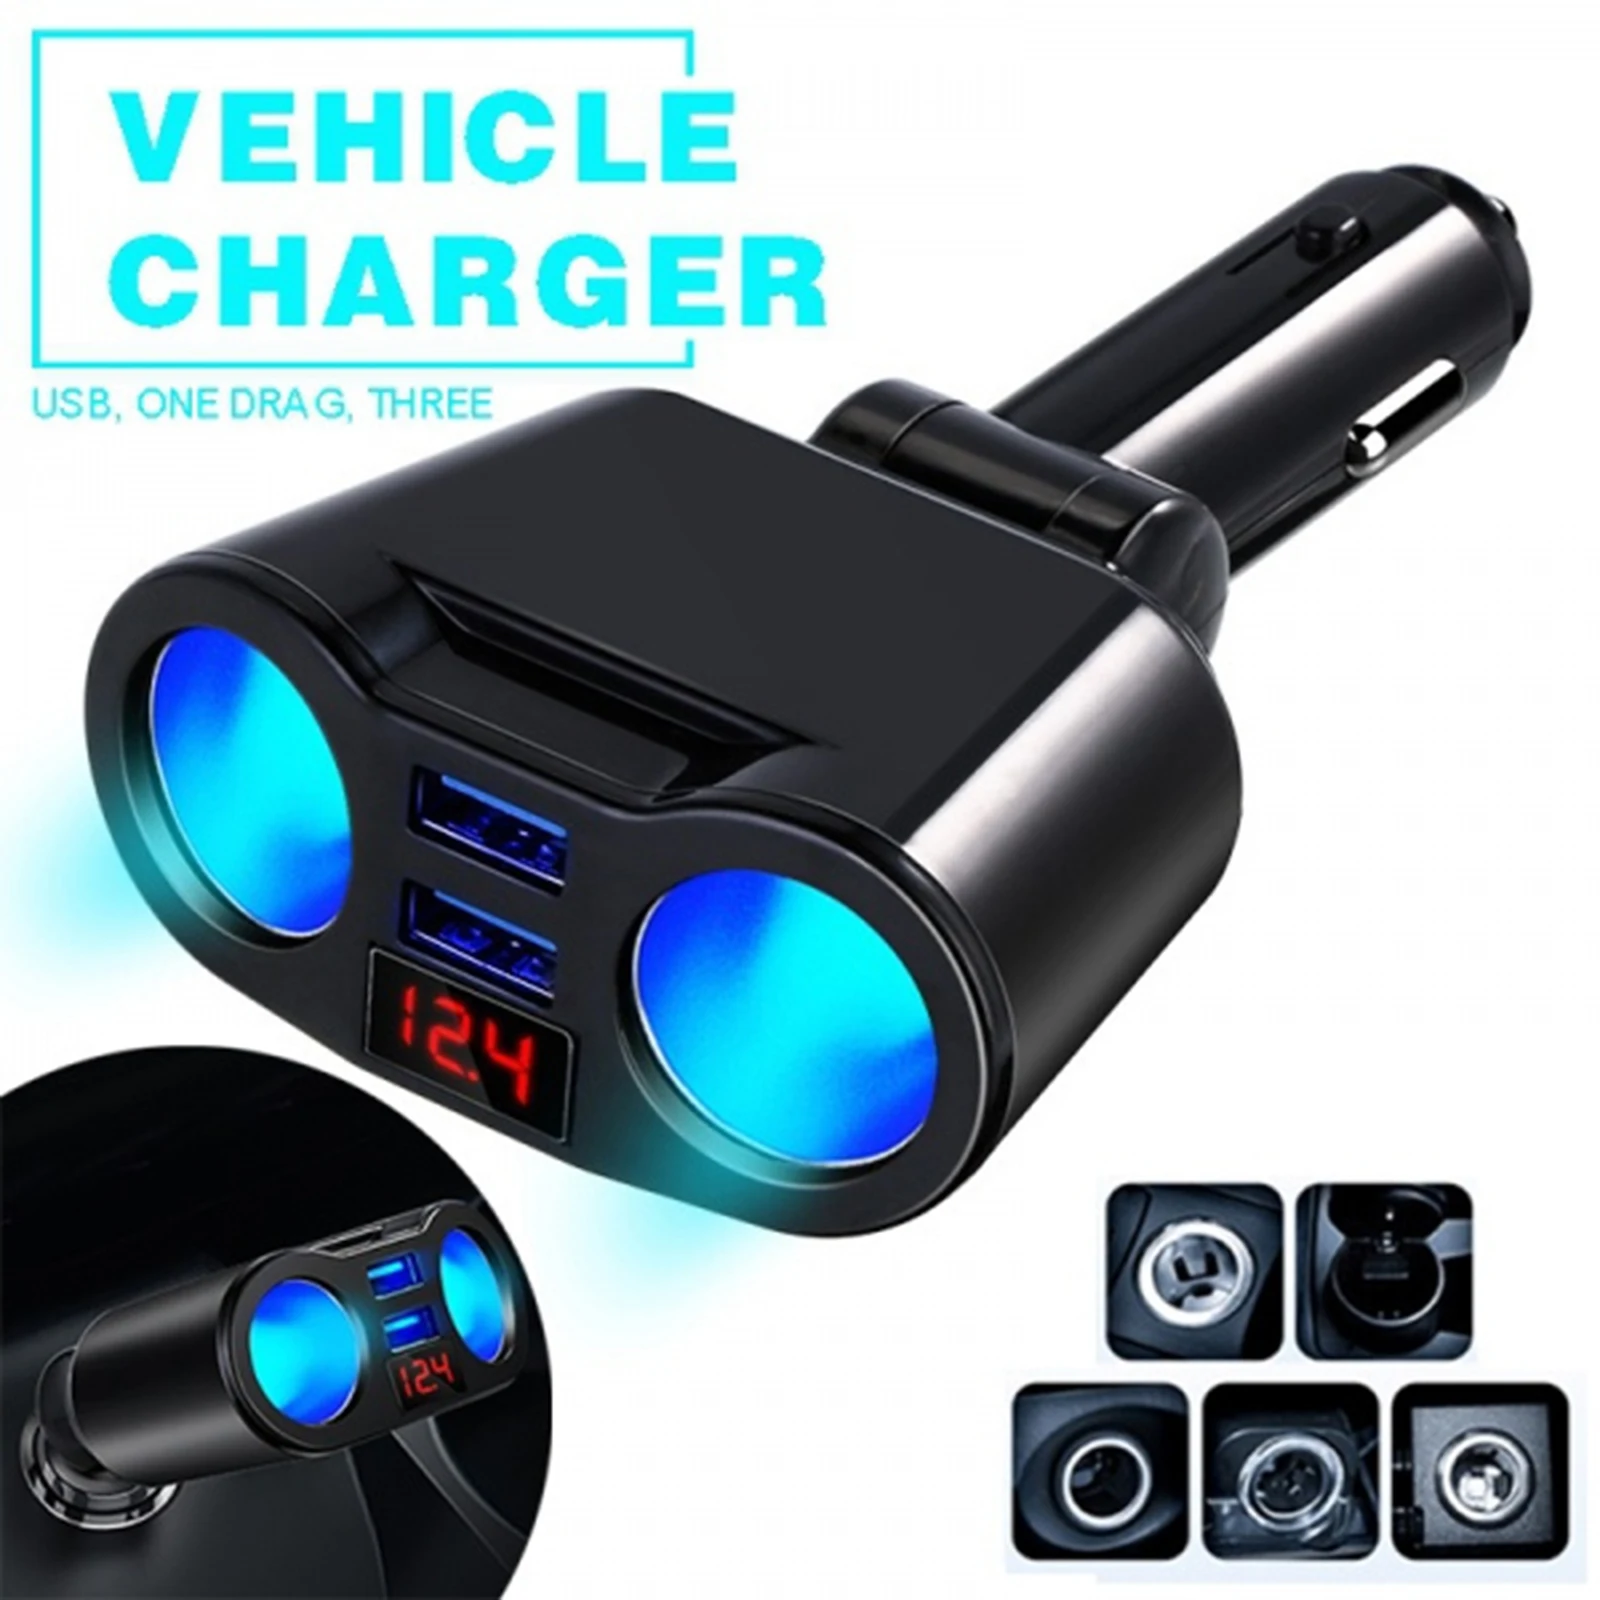 DC 12V Vehicle Cigarette Lighter Adapter Charger 2-Way Dual Plug 5V 3.1A Supplies for Phones Bluetooth Headset Digital Products